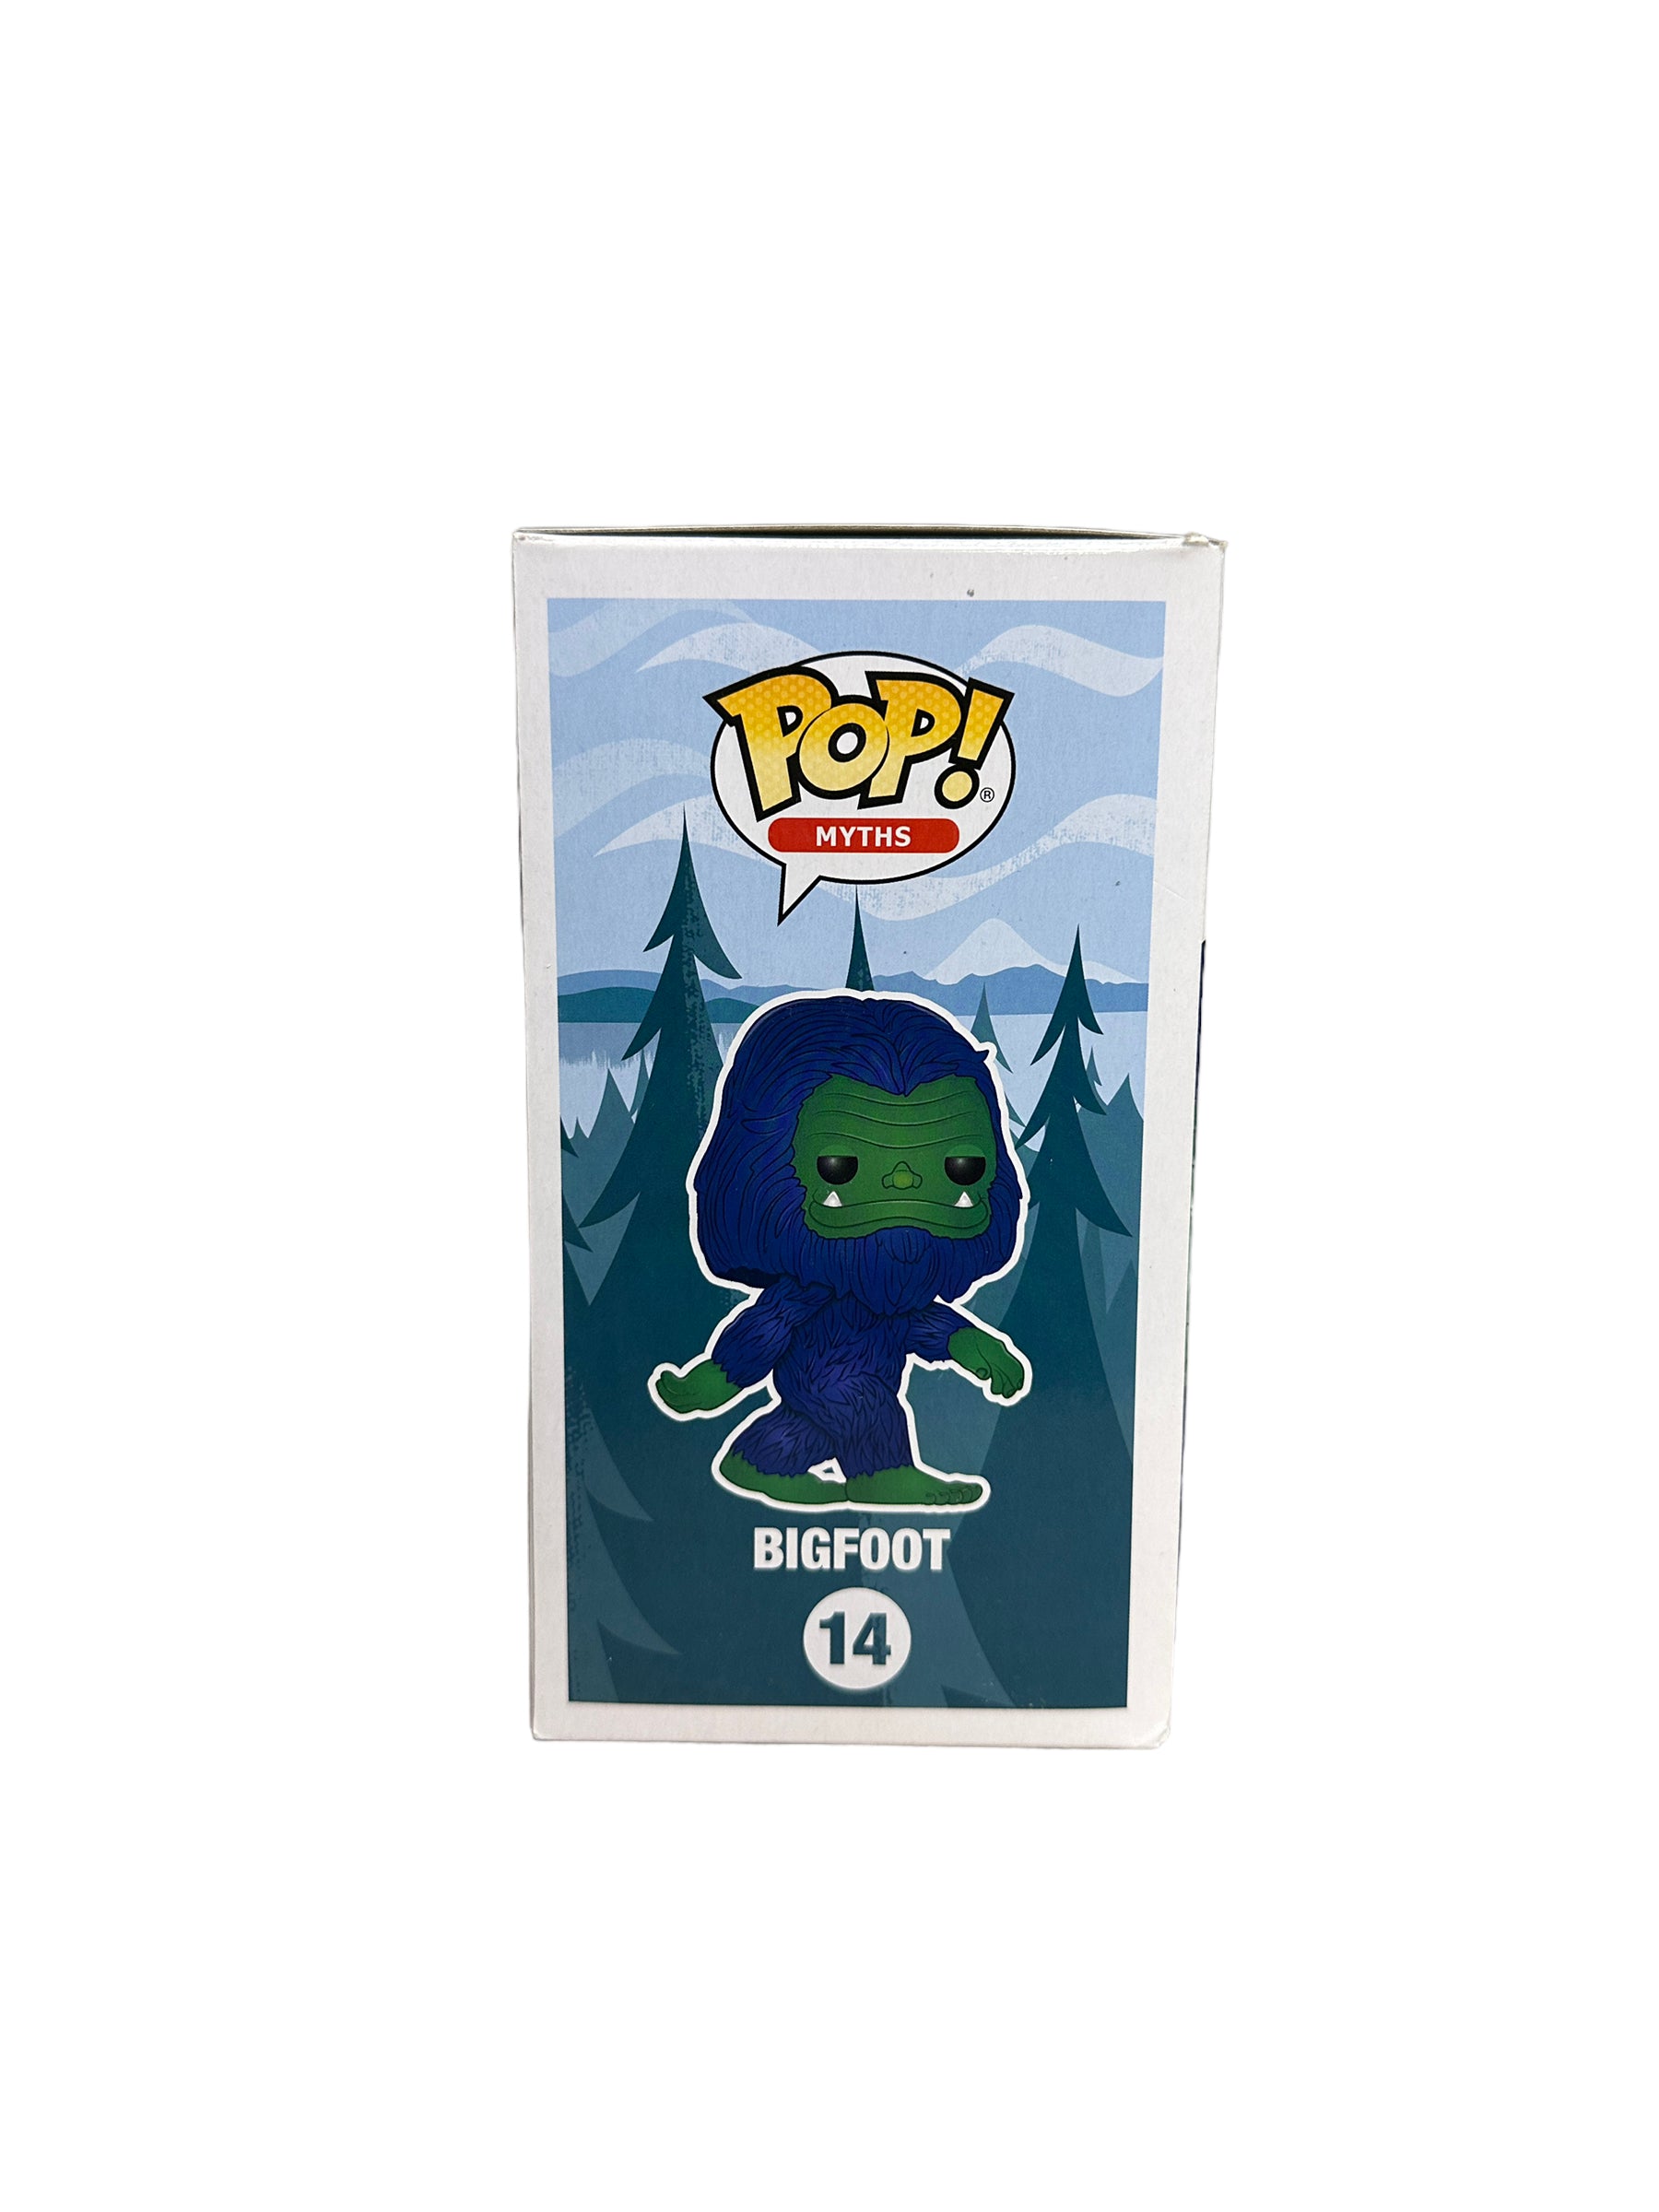 Bigfoot #14 (Blue / Green Flocked) Funko Pop! - Myths - ECCC 2018 Shared Exclusive LE2500 Pcs - Condition 8.5/10